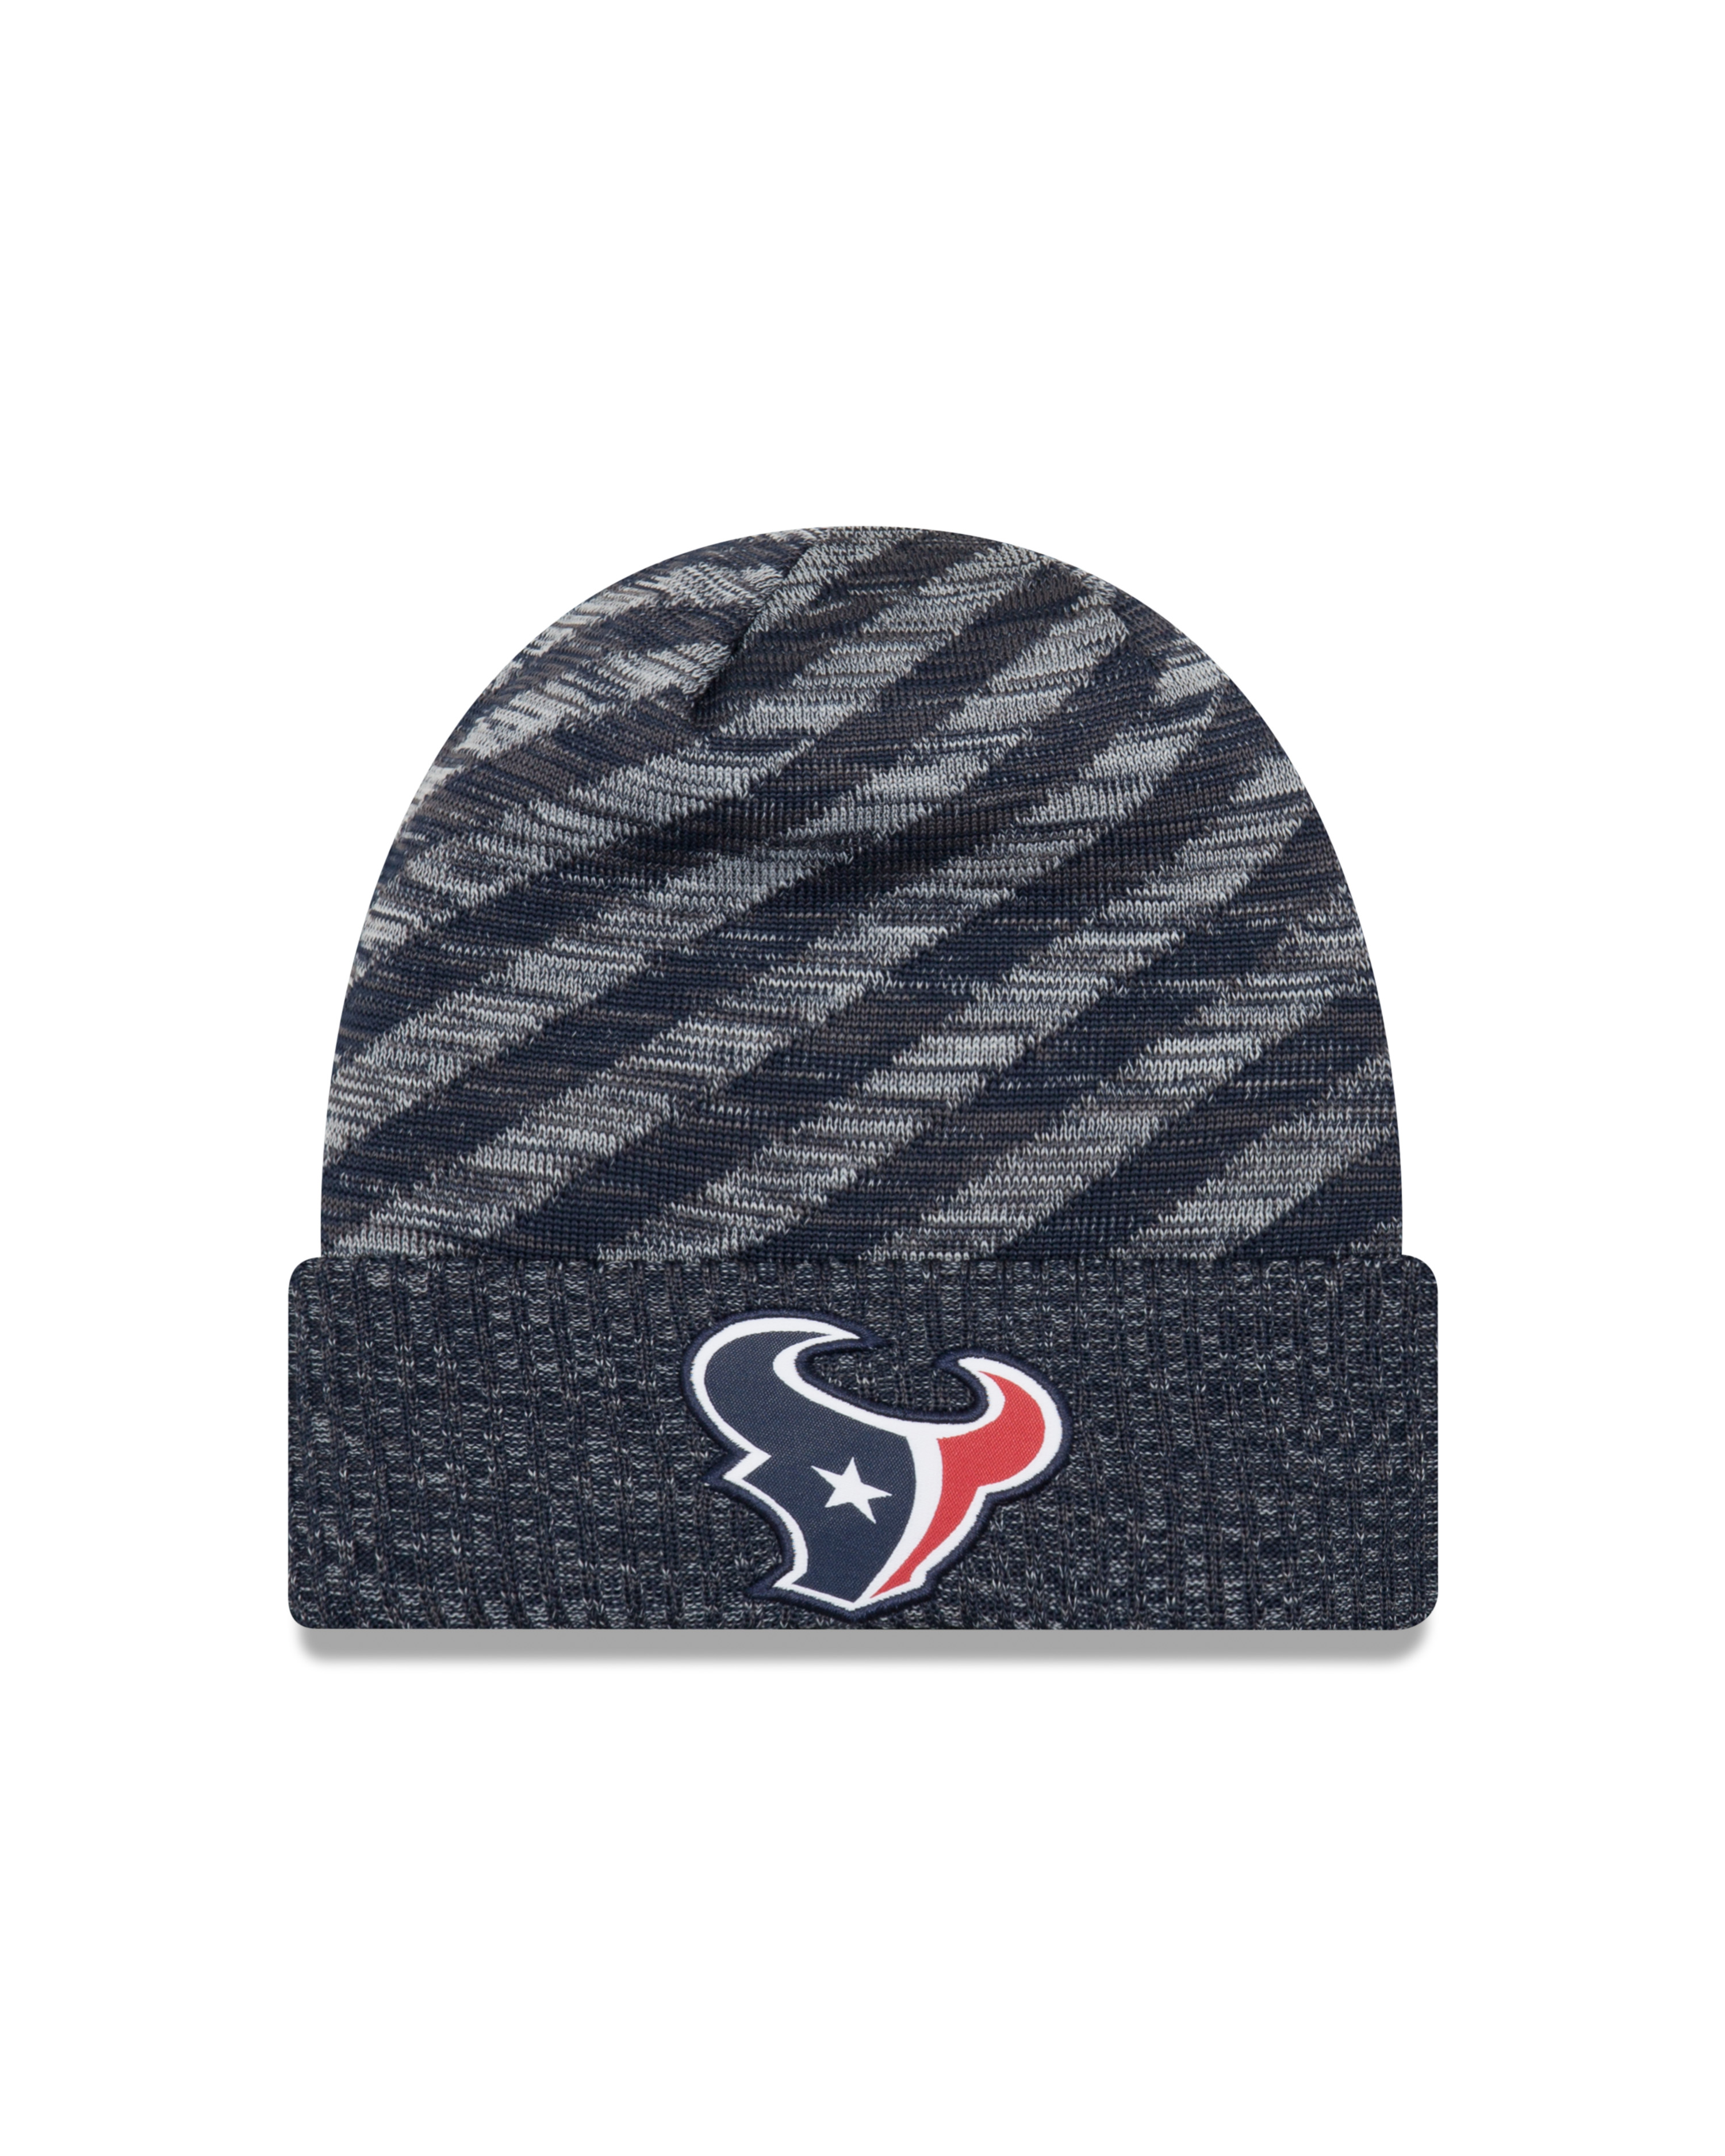 New Era Official NFL Cold Weather Collection #19